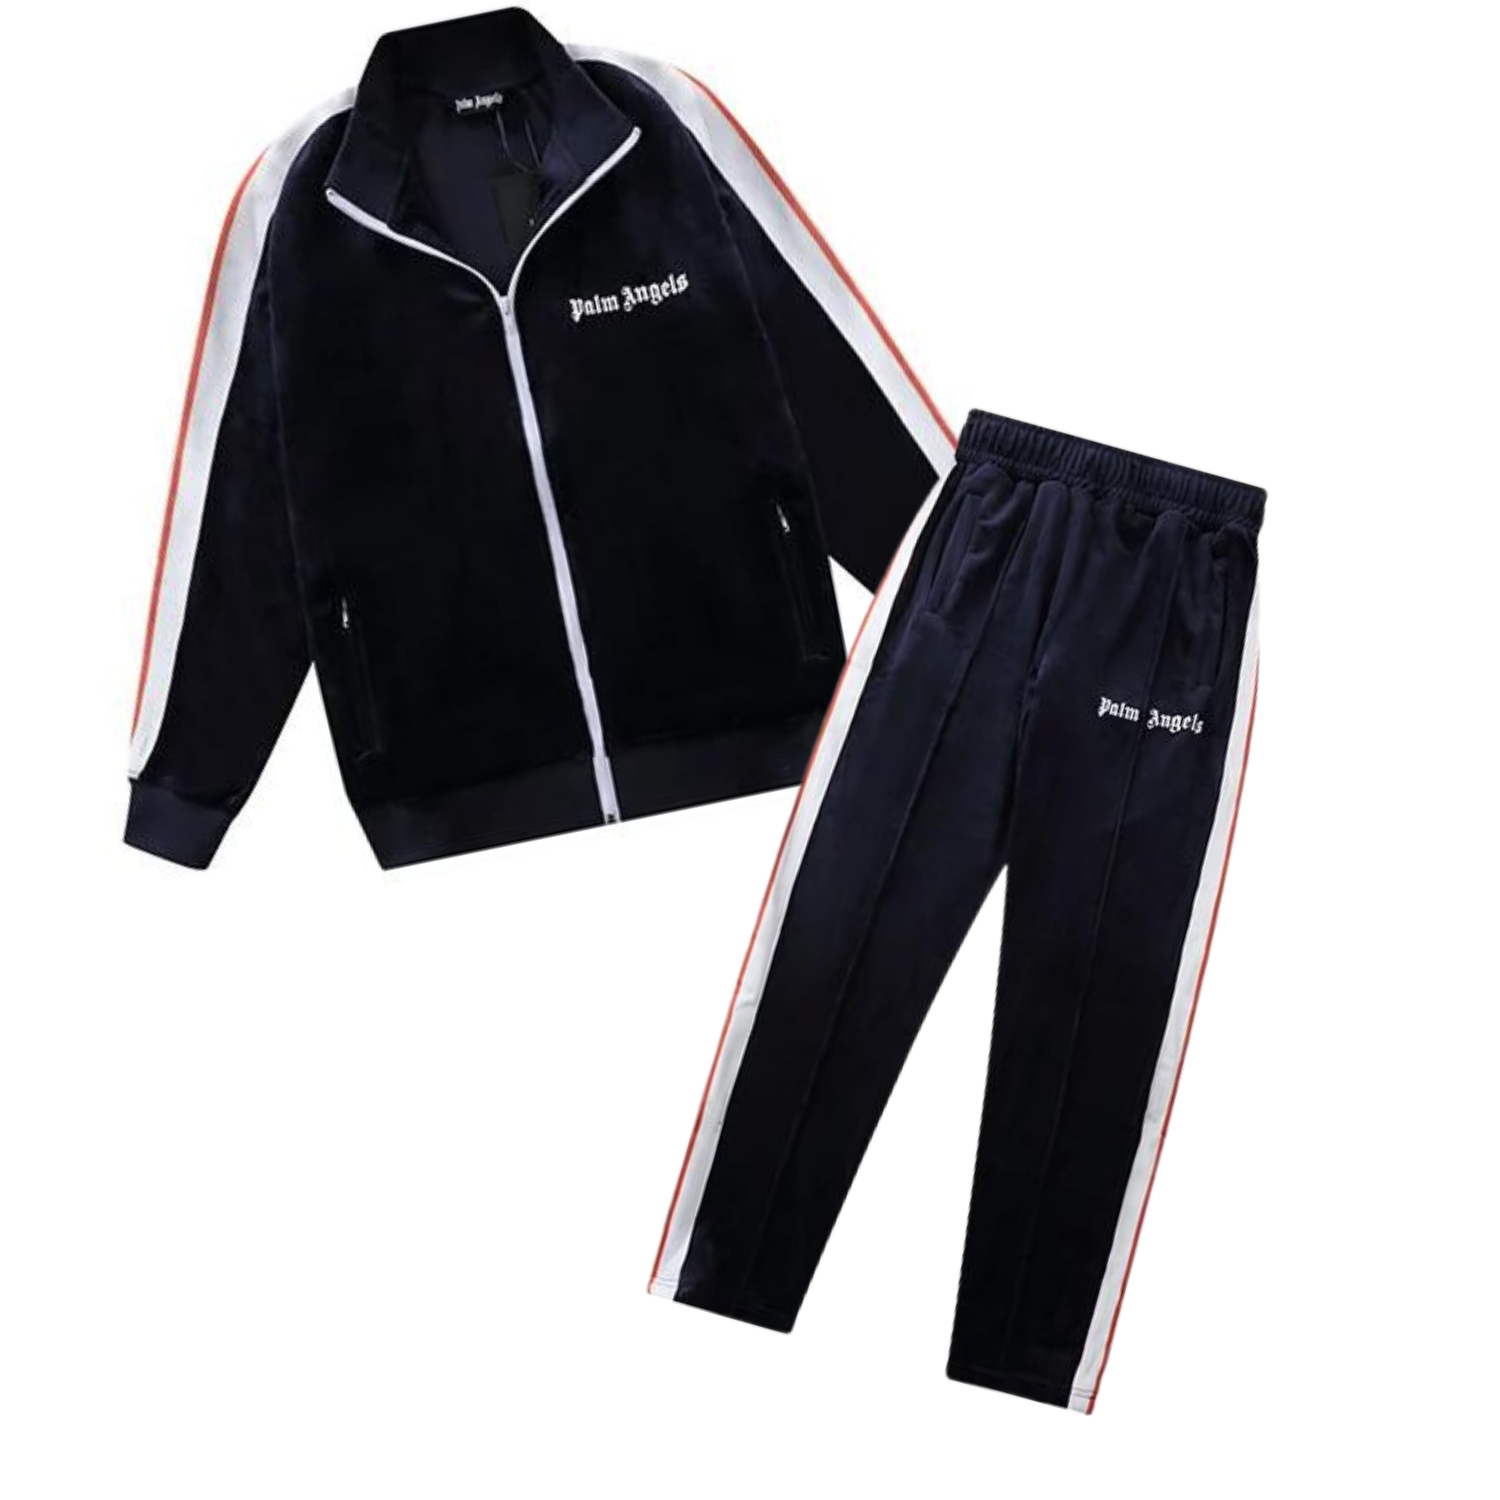 PALM ANGELS TRACKSUIT – DRYP STORE®